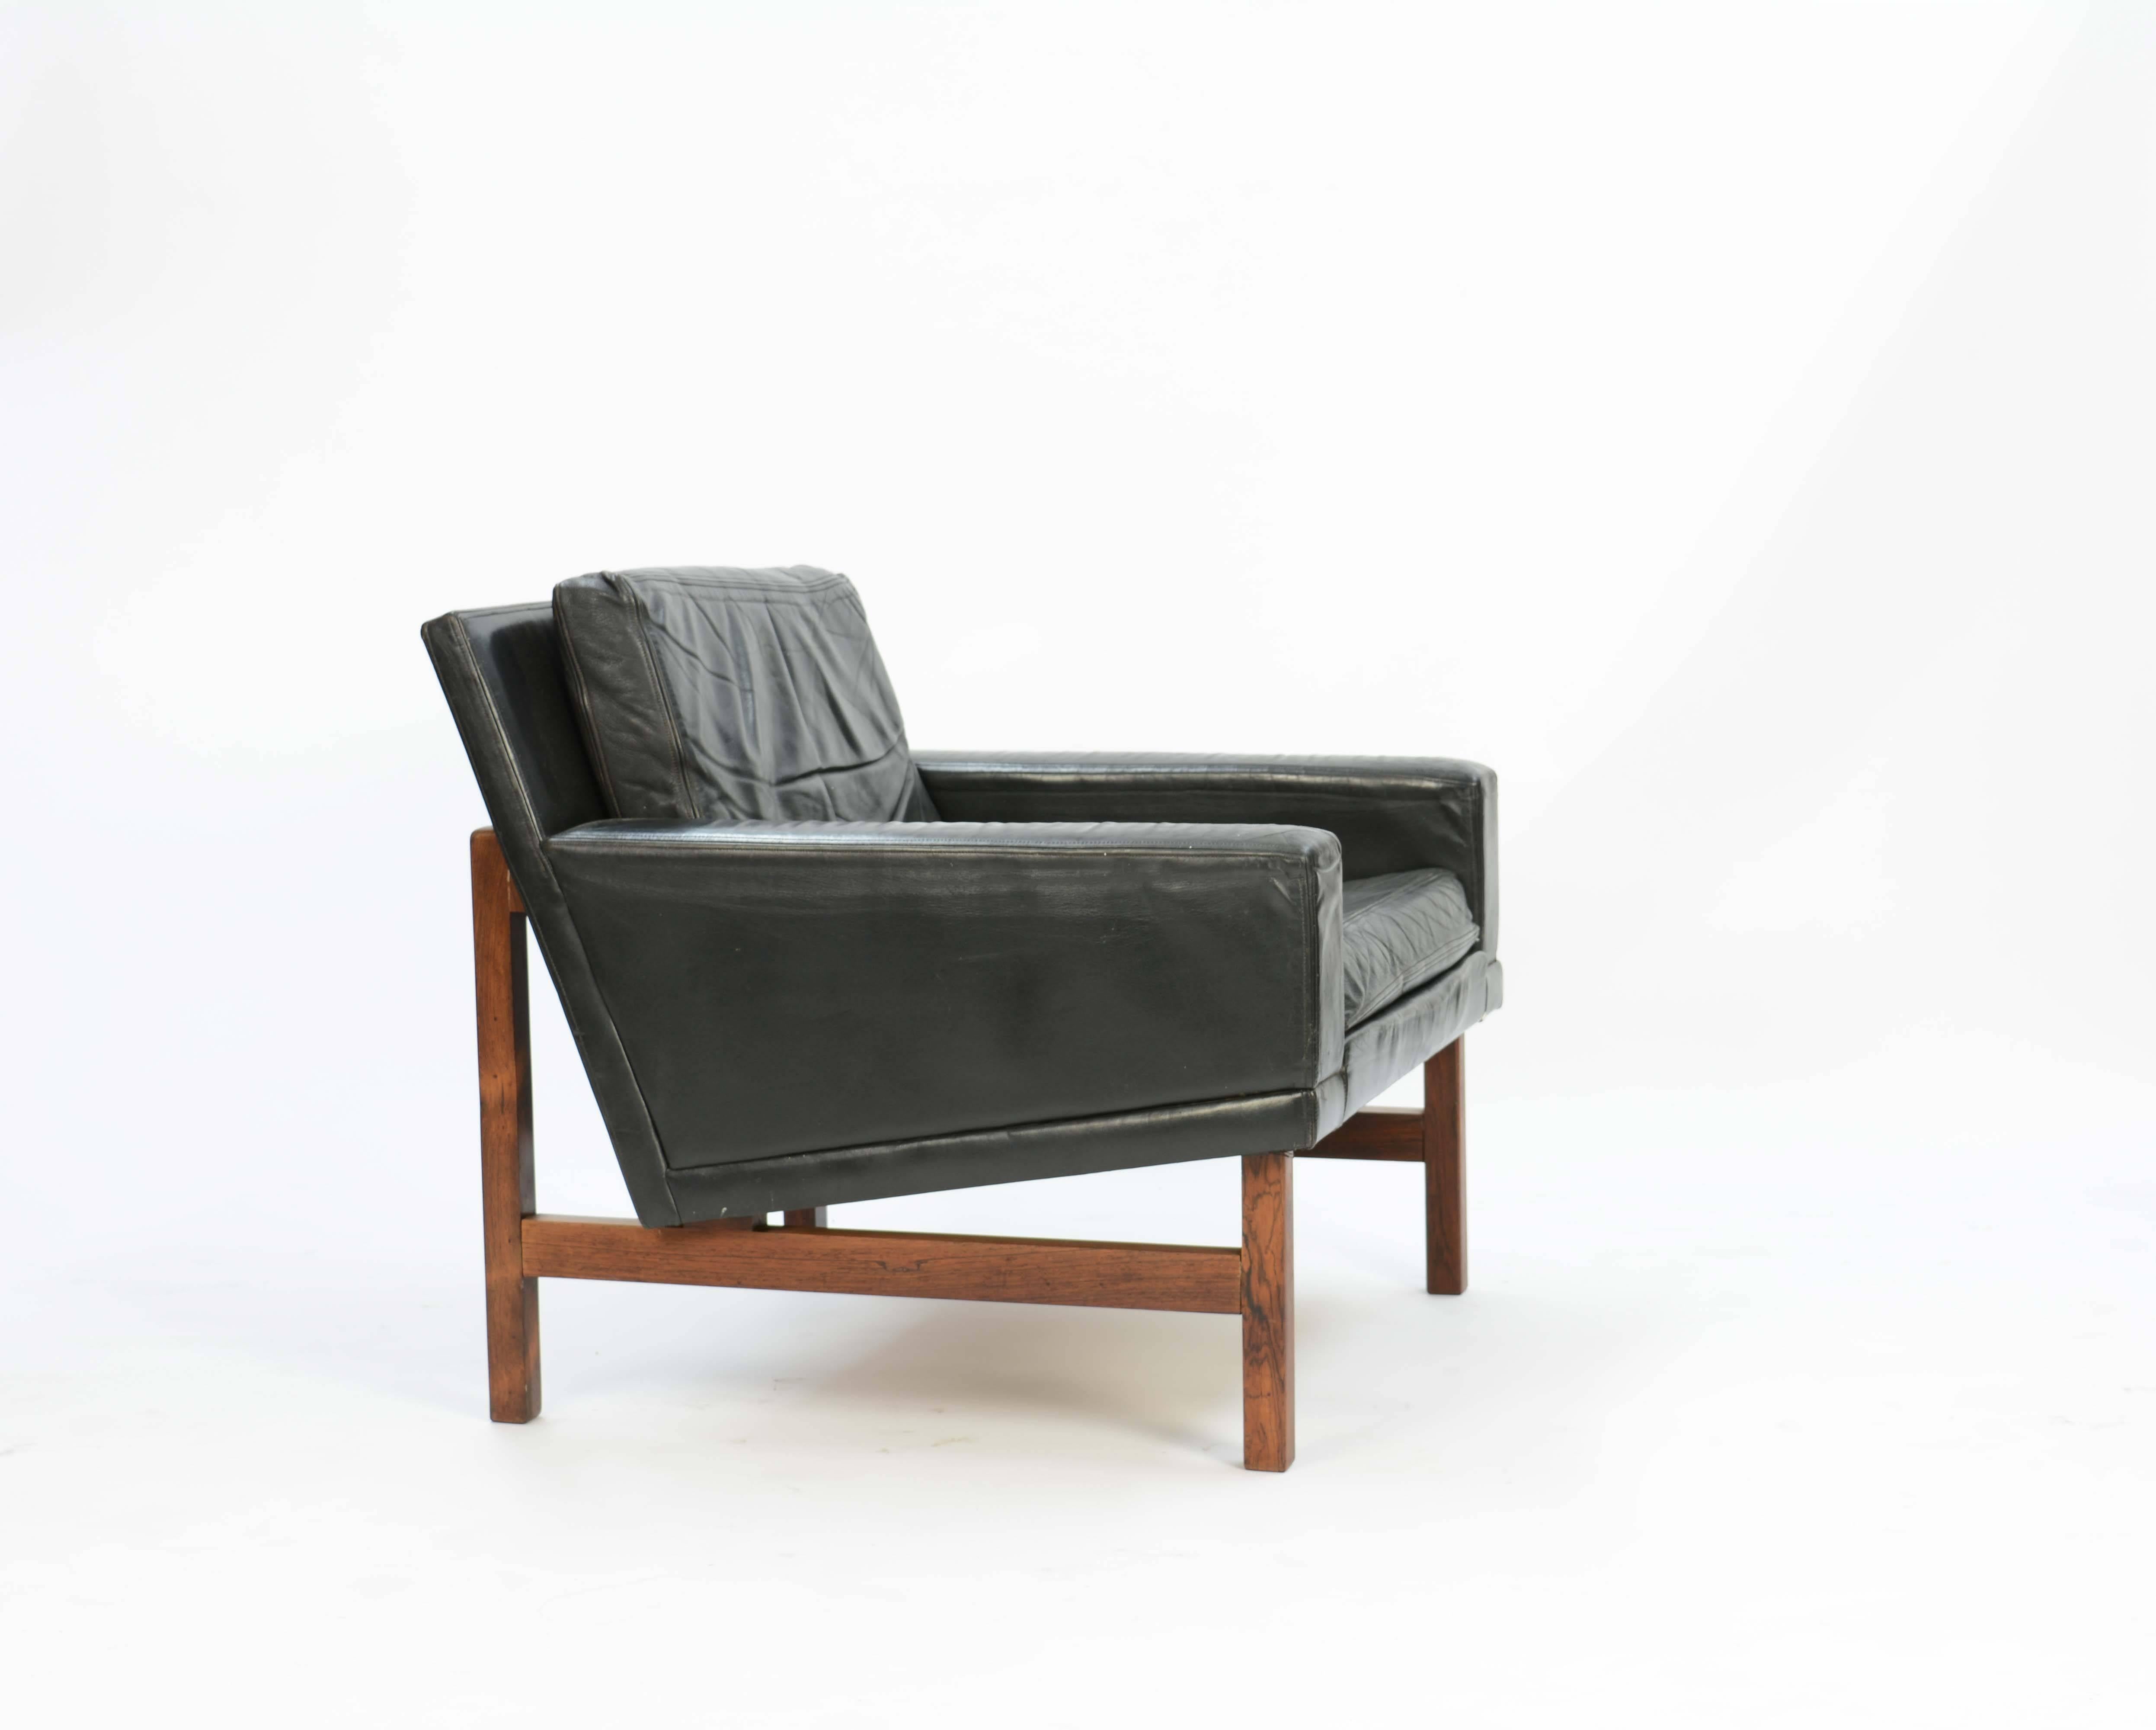 Scandinavian Modern Pair of Distressed Leather Club Chairs with Rosewood Frames by Sven Ellekaer